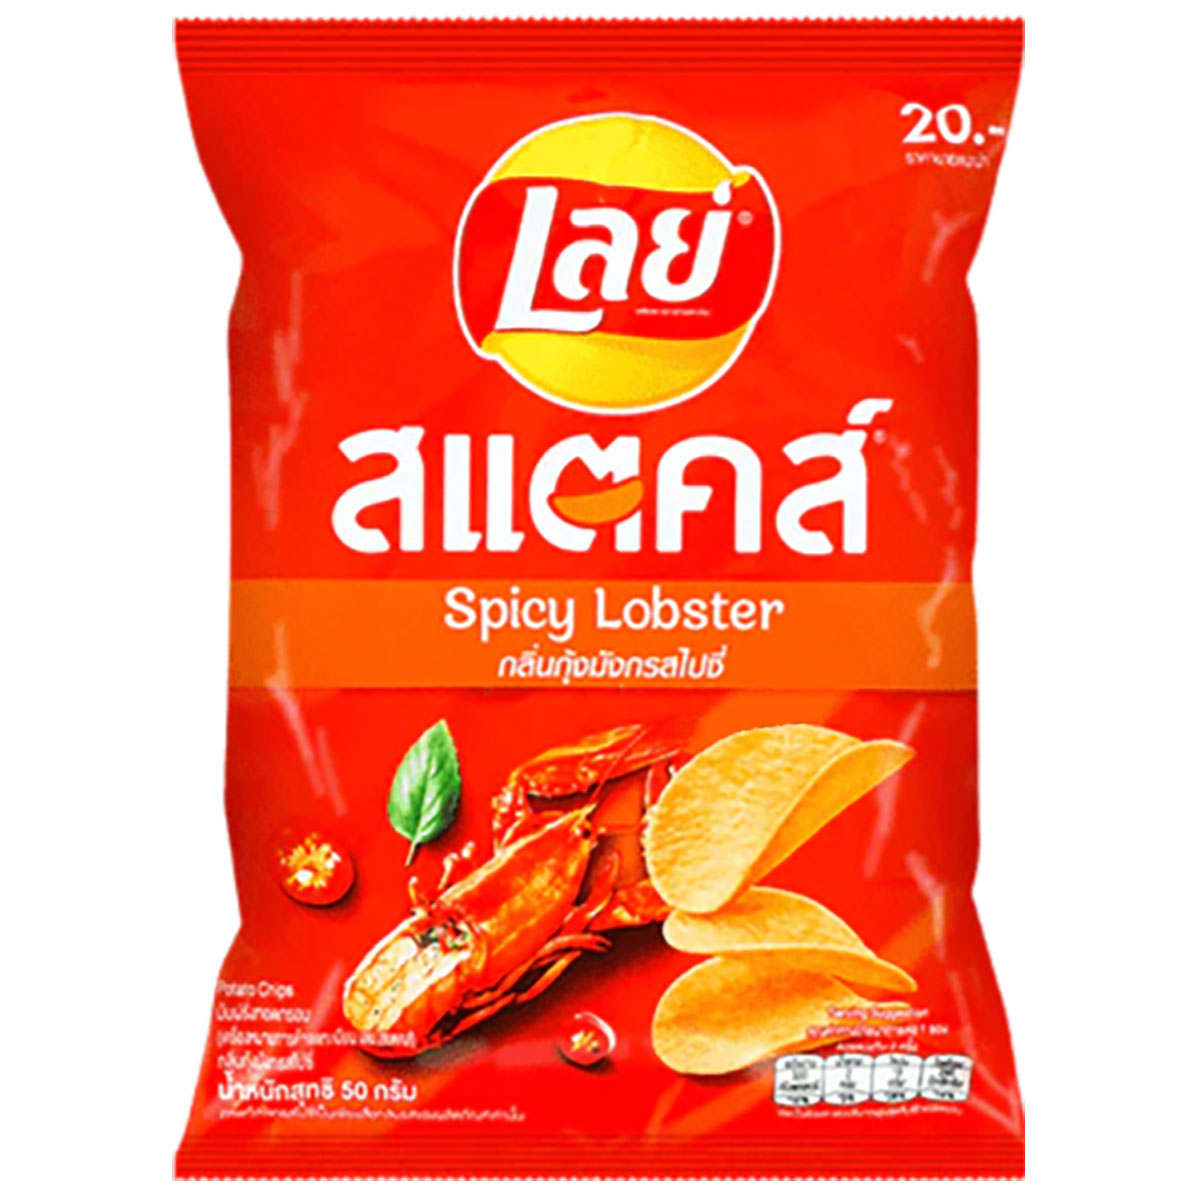 Lay's Potato Chips Spicy Lobster Flavor - 1.76oz